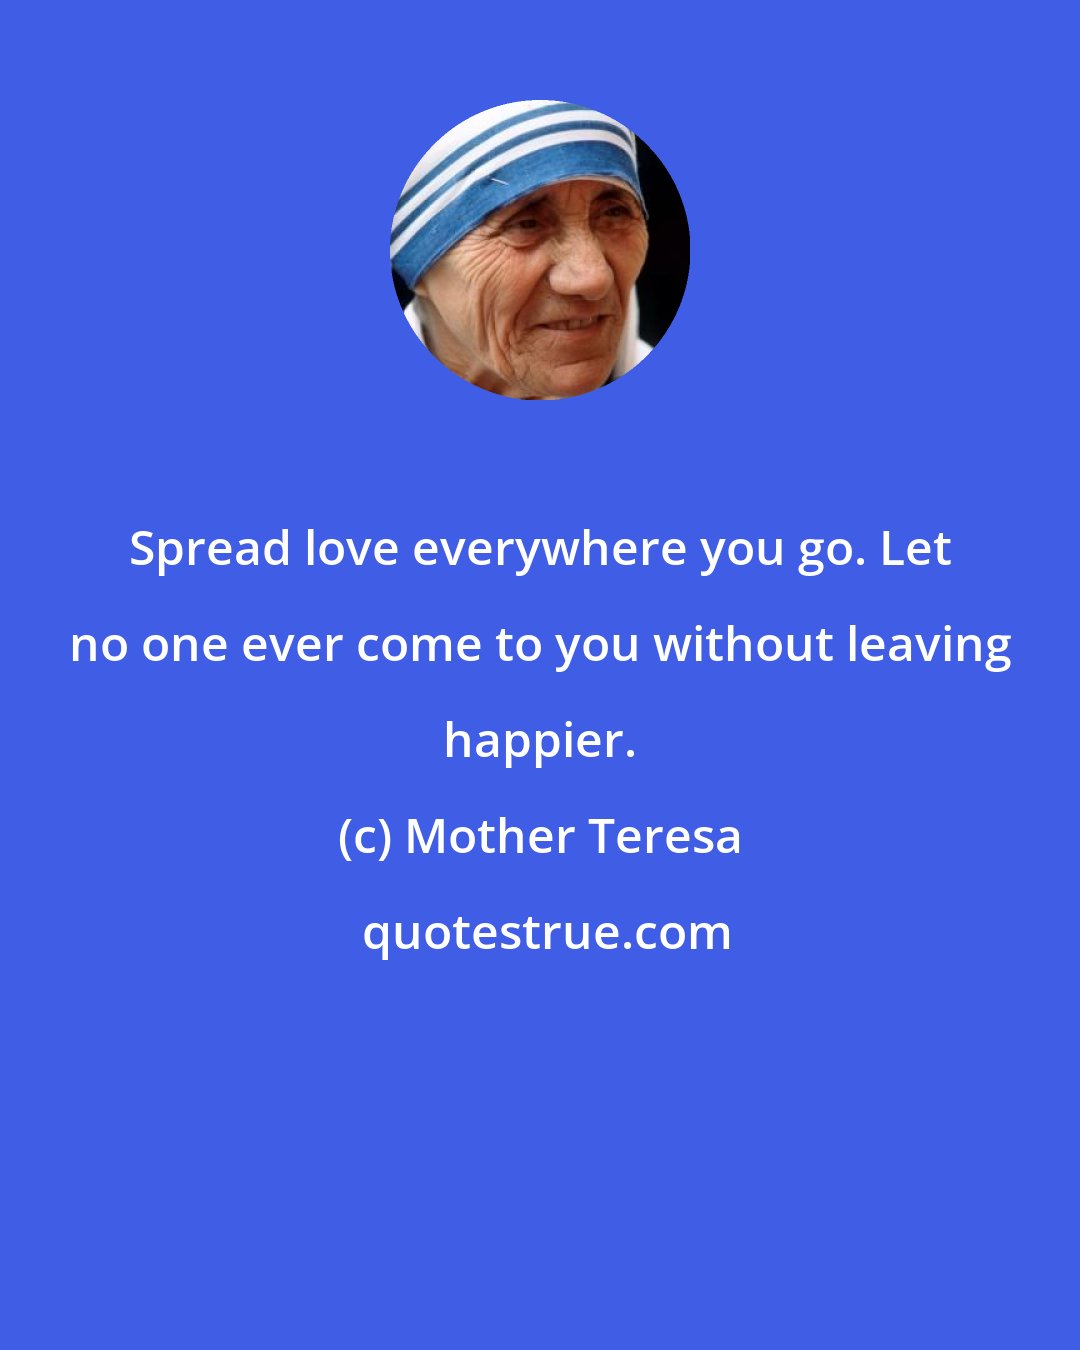 Mother Teresa: Spread love everywhere you go. Let no one ever come to you without leaving happier.